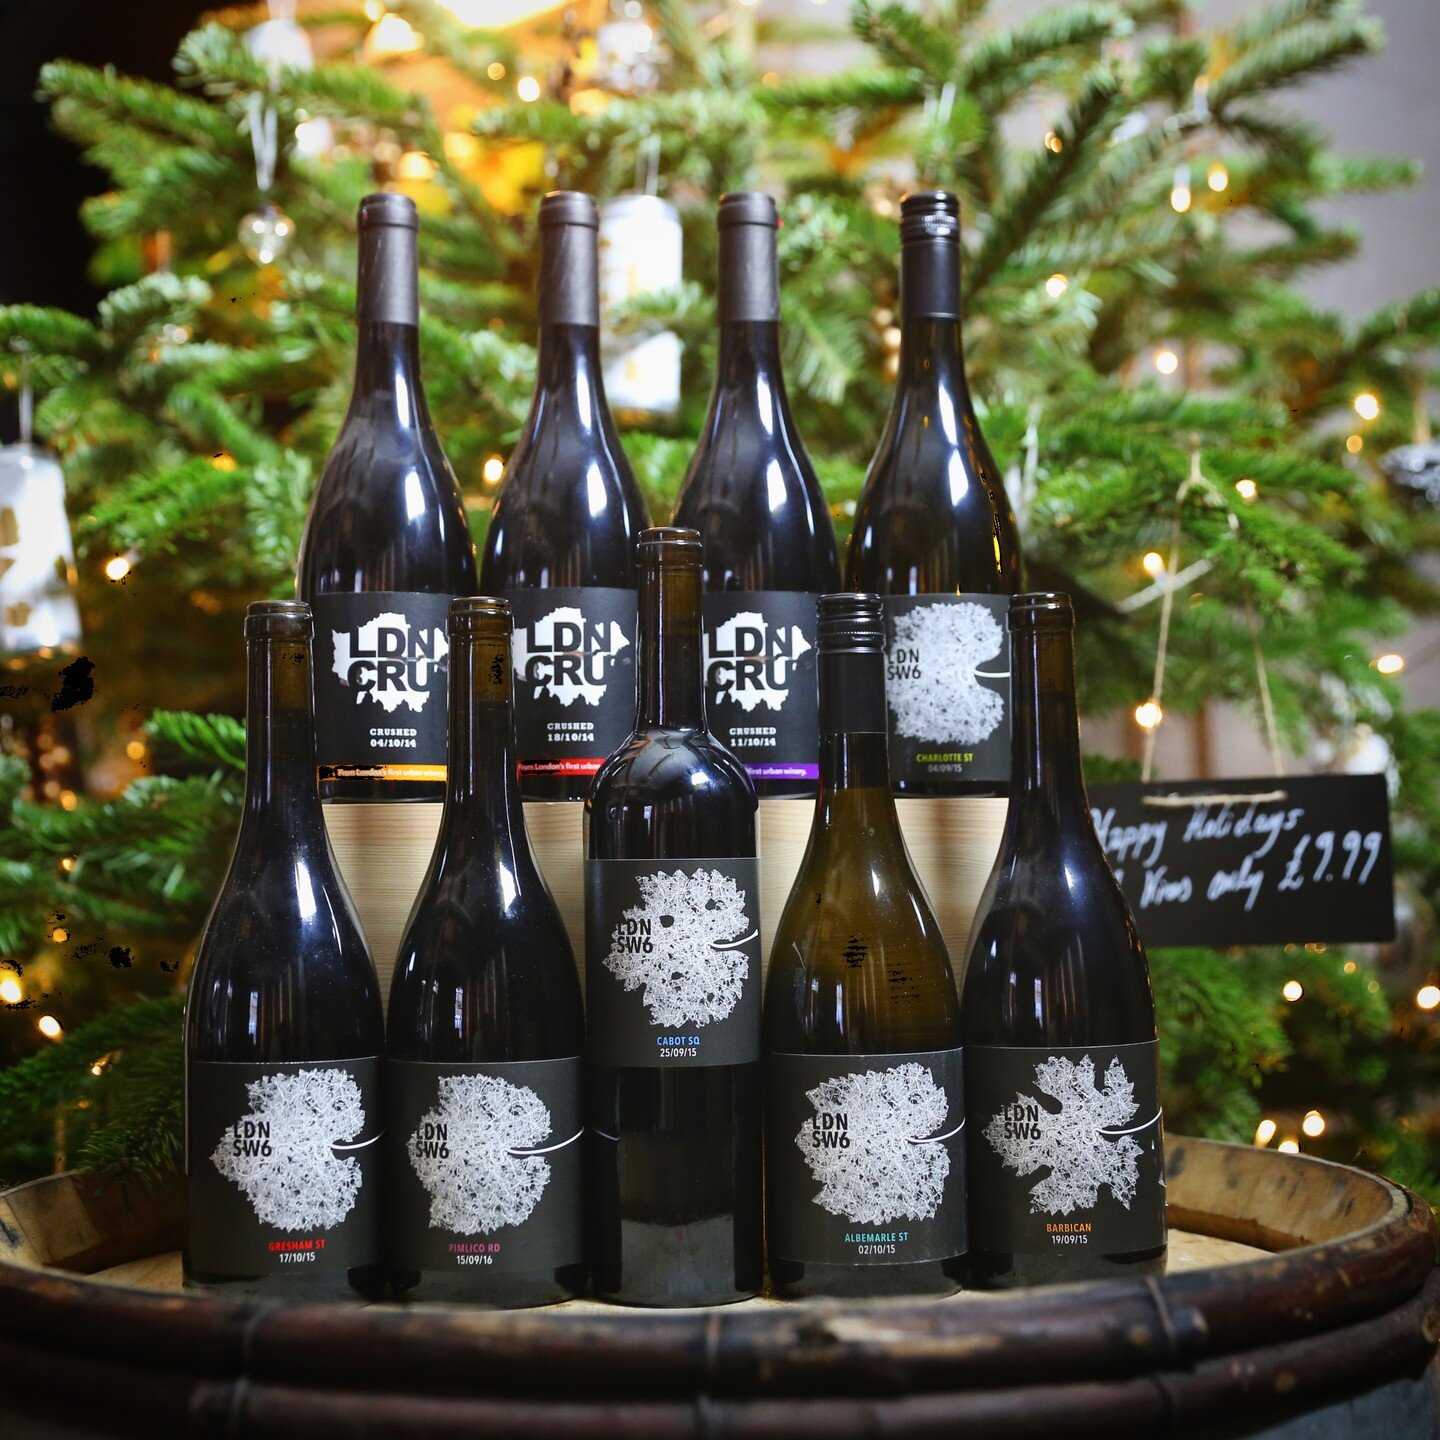 🎁Gift the joy of great taste! The last of our rare back vintages all only &pound;9.99 ✨ 🍷

Each bottle is a testament to the craftsmanship and passion embedded in our winemaking journey. Don't miss the last chance to make these quality wines a part